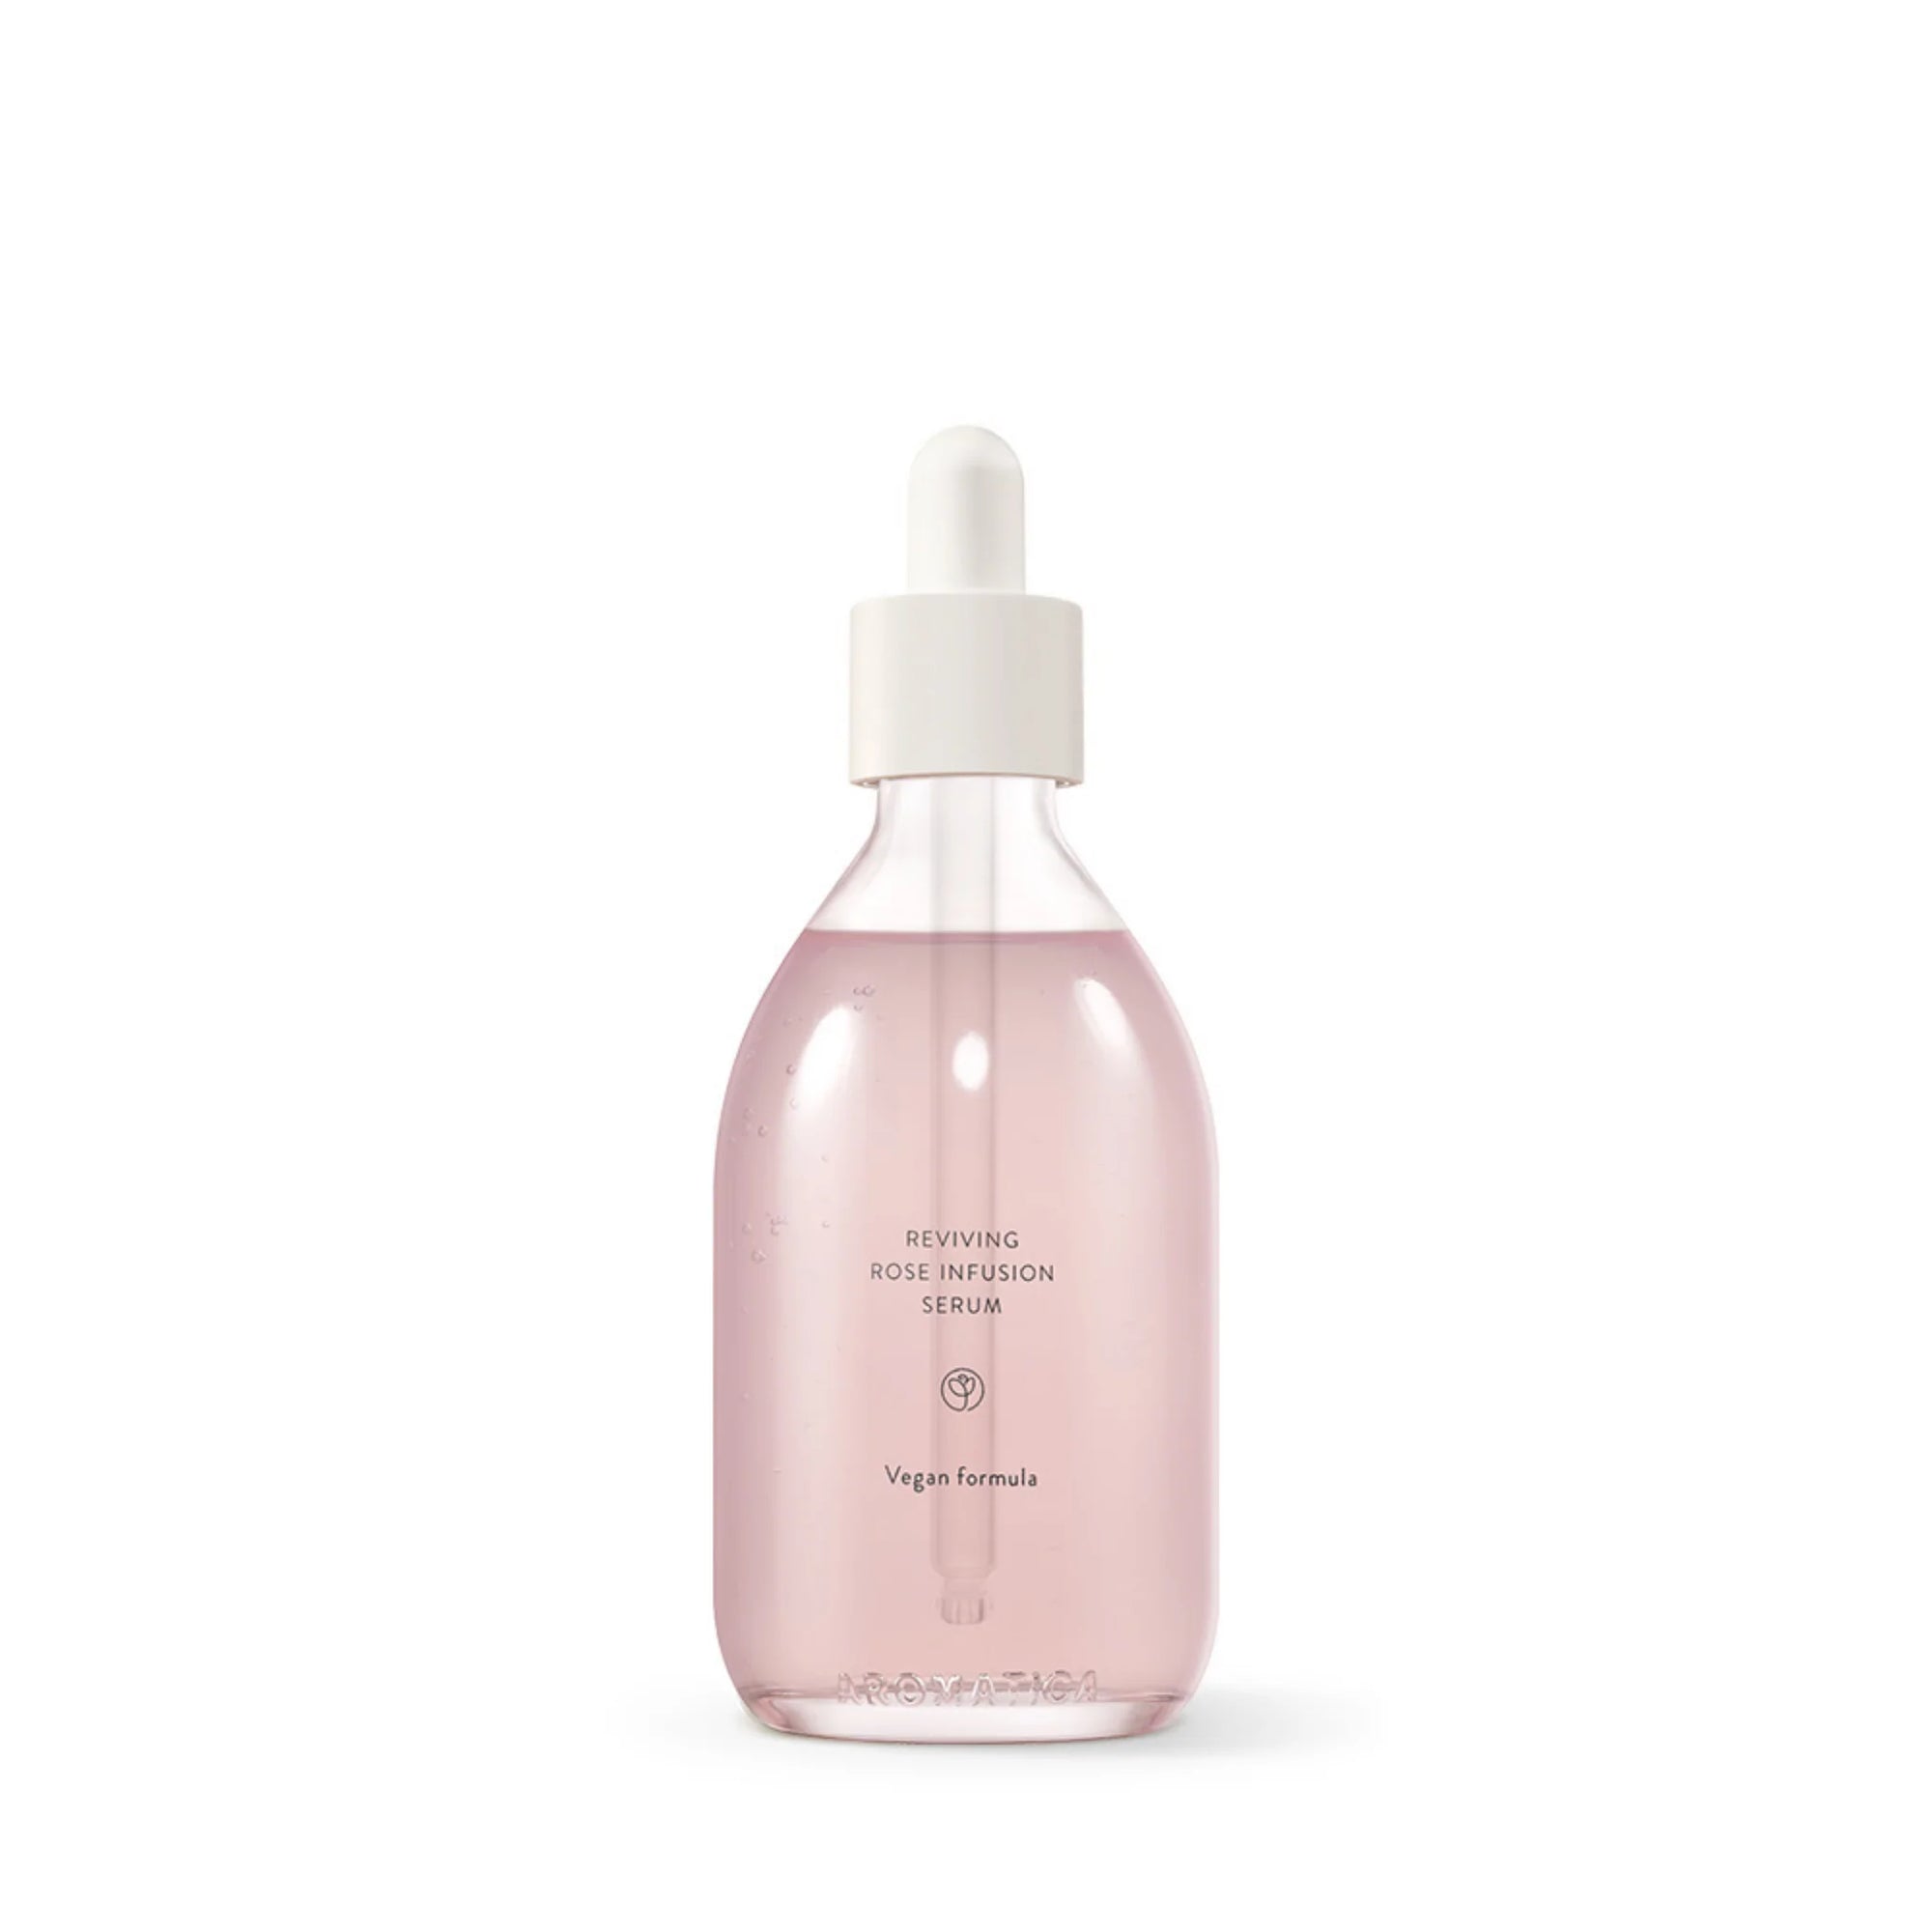 AROMATICA - Reviving Rose Infusion Serum (Discounted)